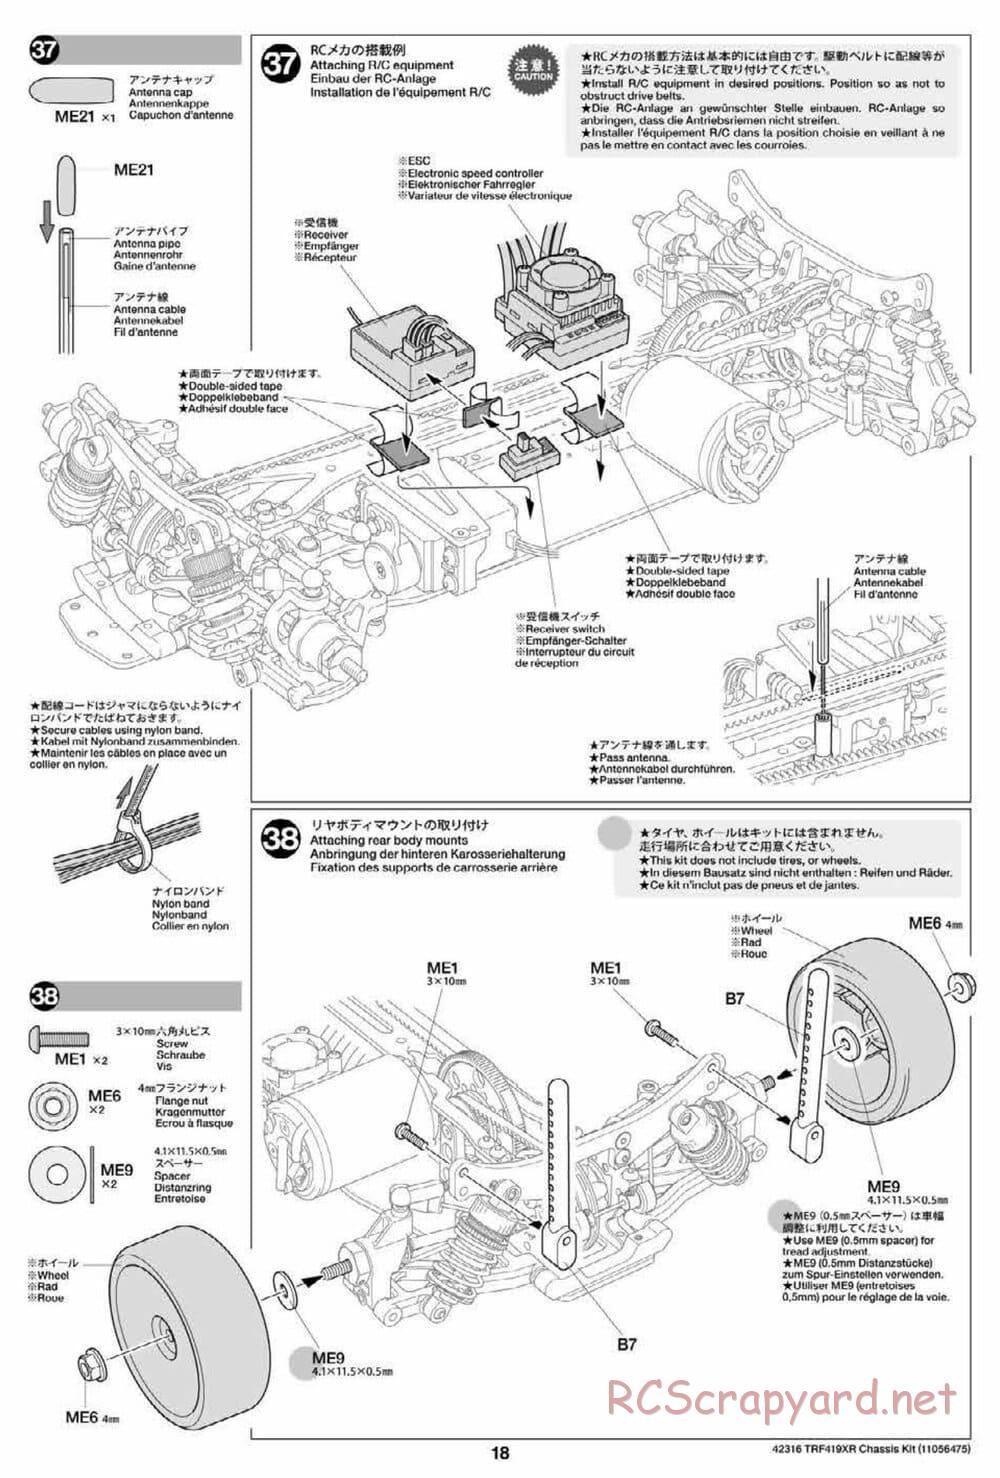 Tamiya - TRF419XR Chassis - Manual - Page 18